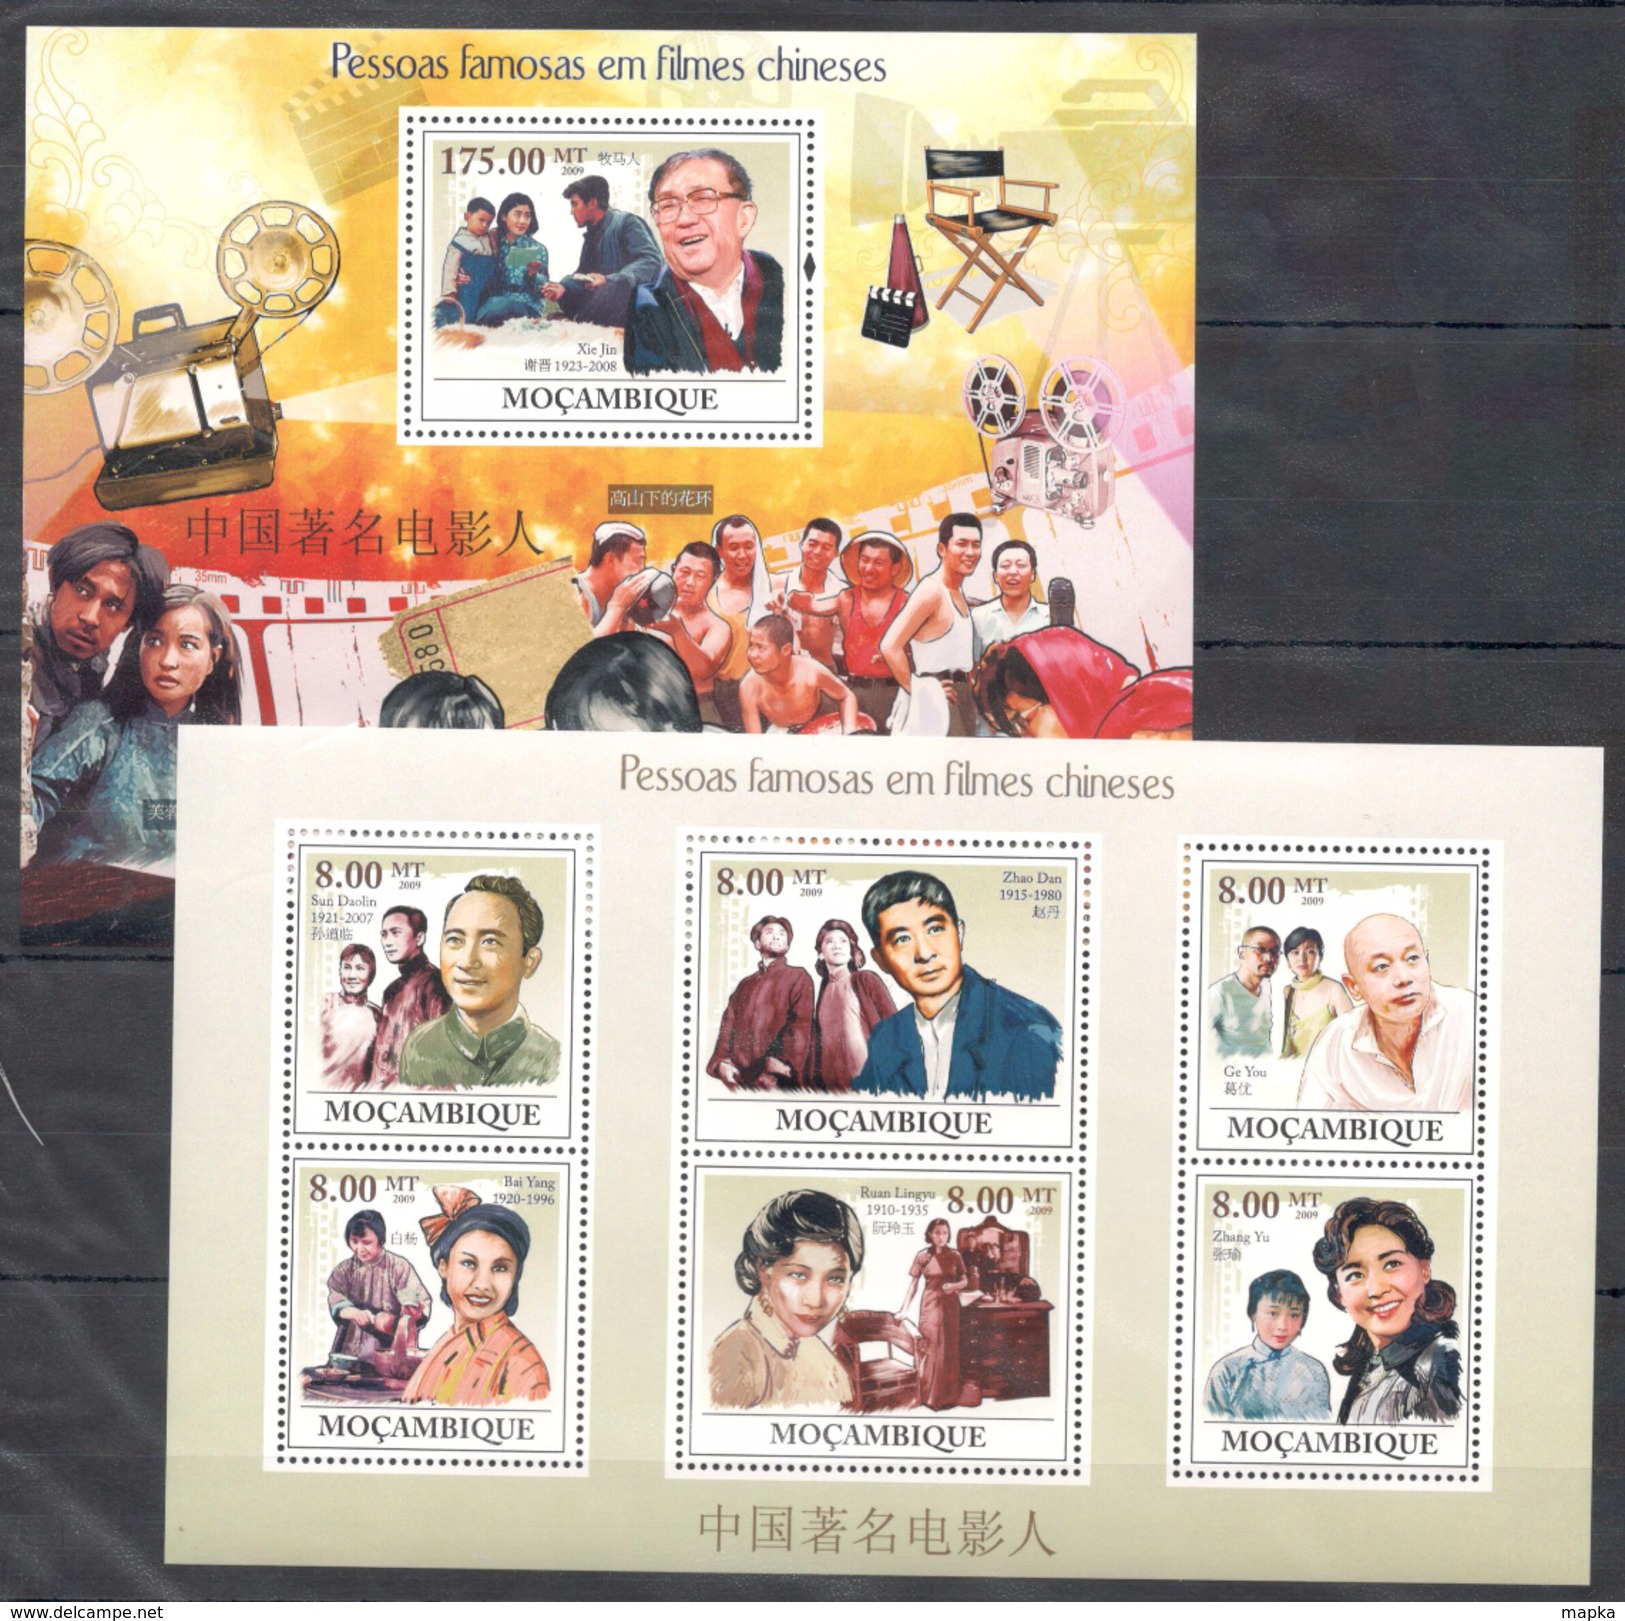 A231 2009 S MOCAMBIQUE FAMOUS PEOPLE FILMES CHINESES XIE JIN ZHAO DAN 1KB+1BL MNH - Schauspieler